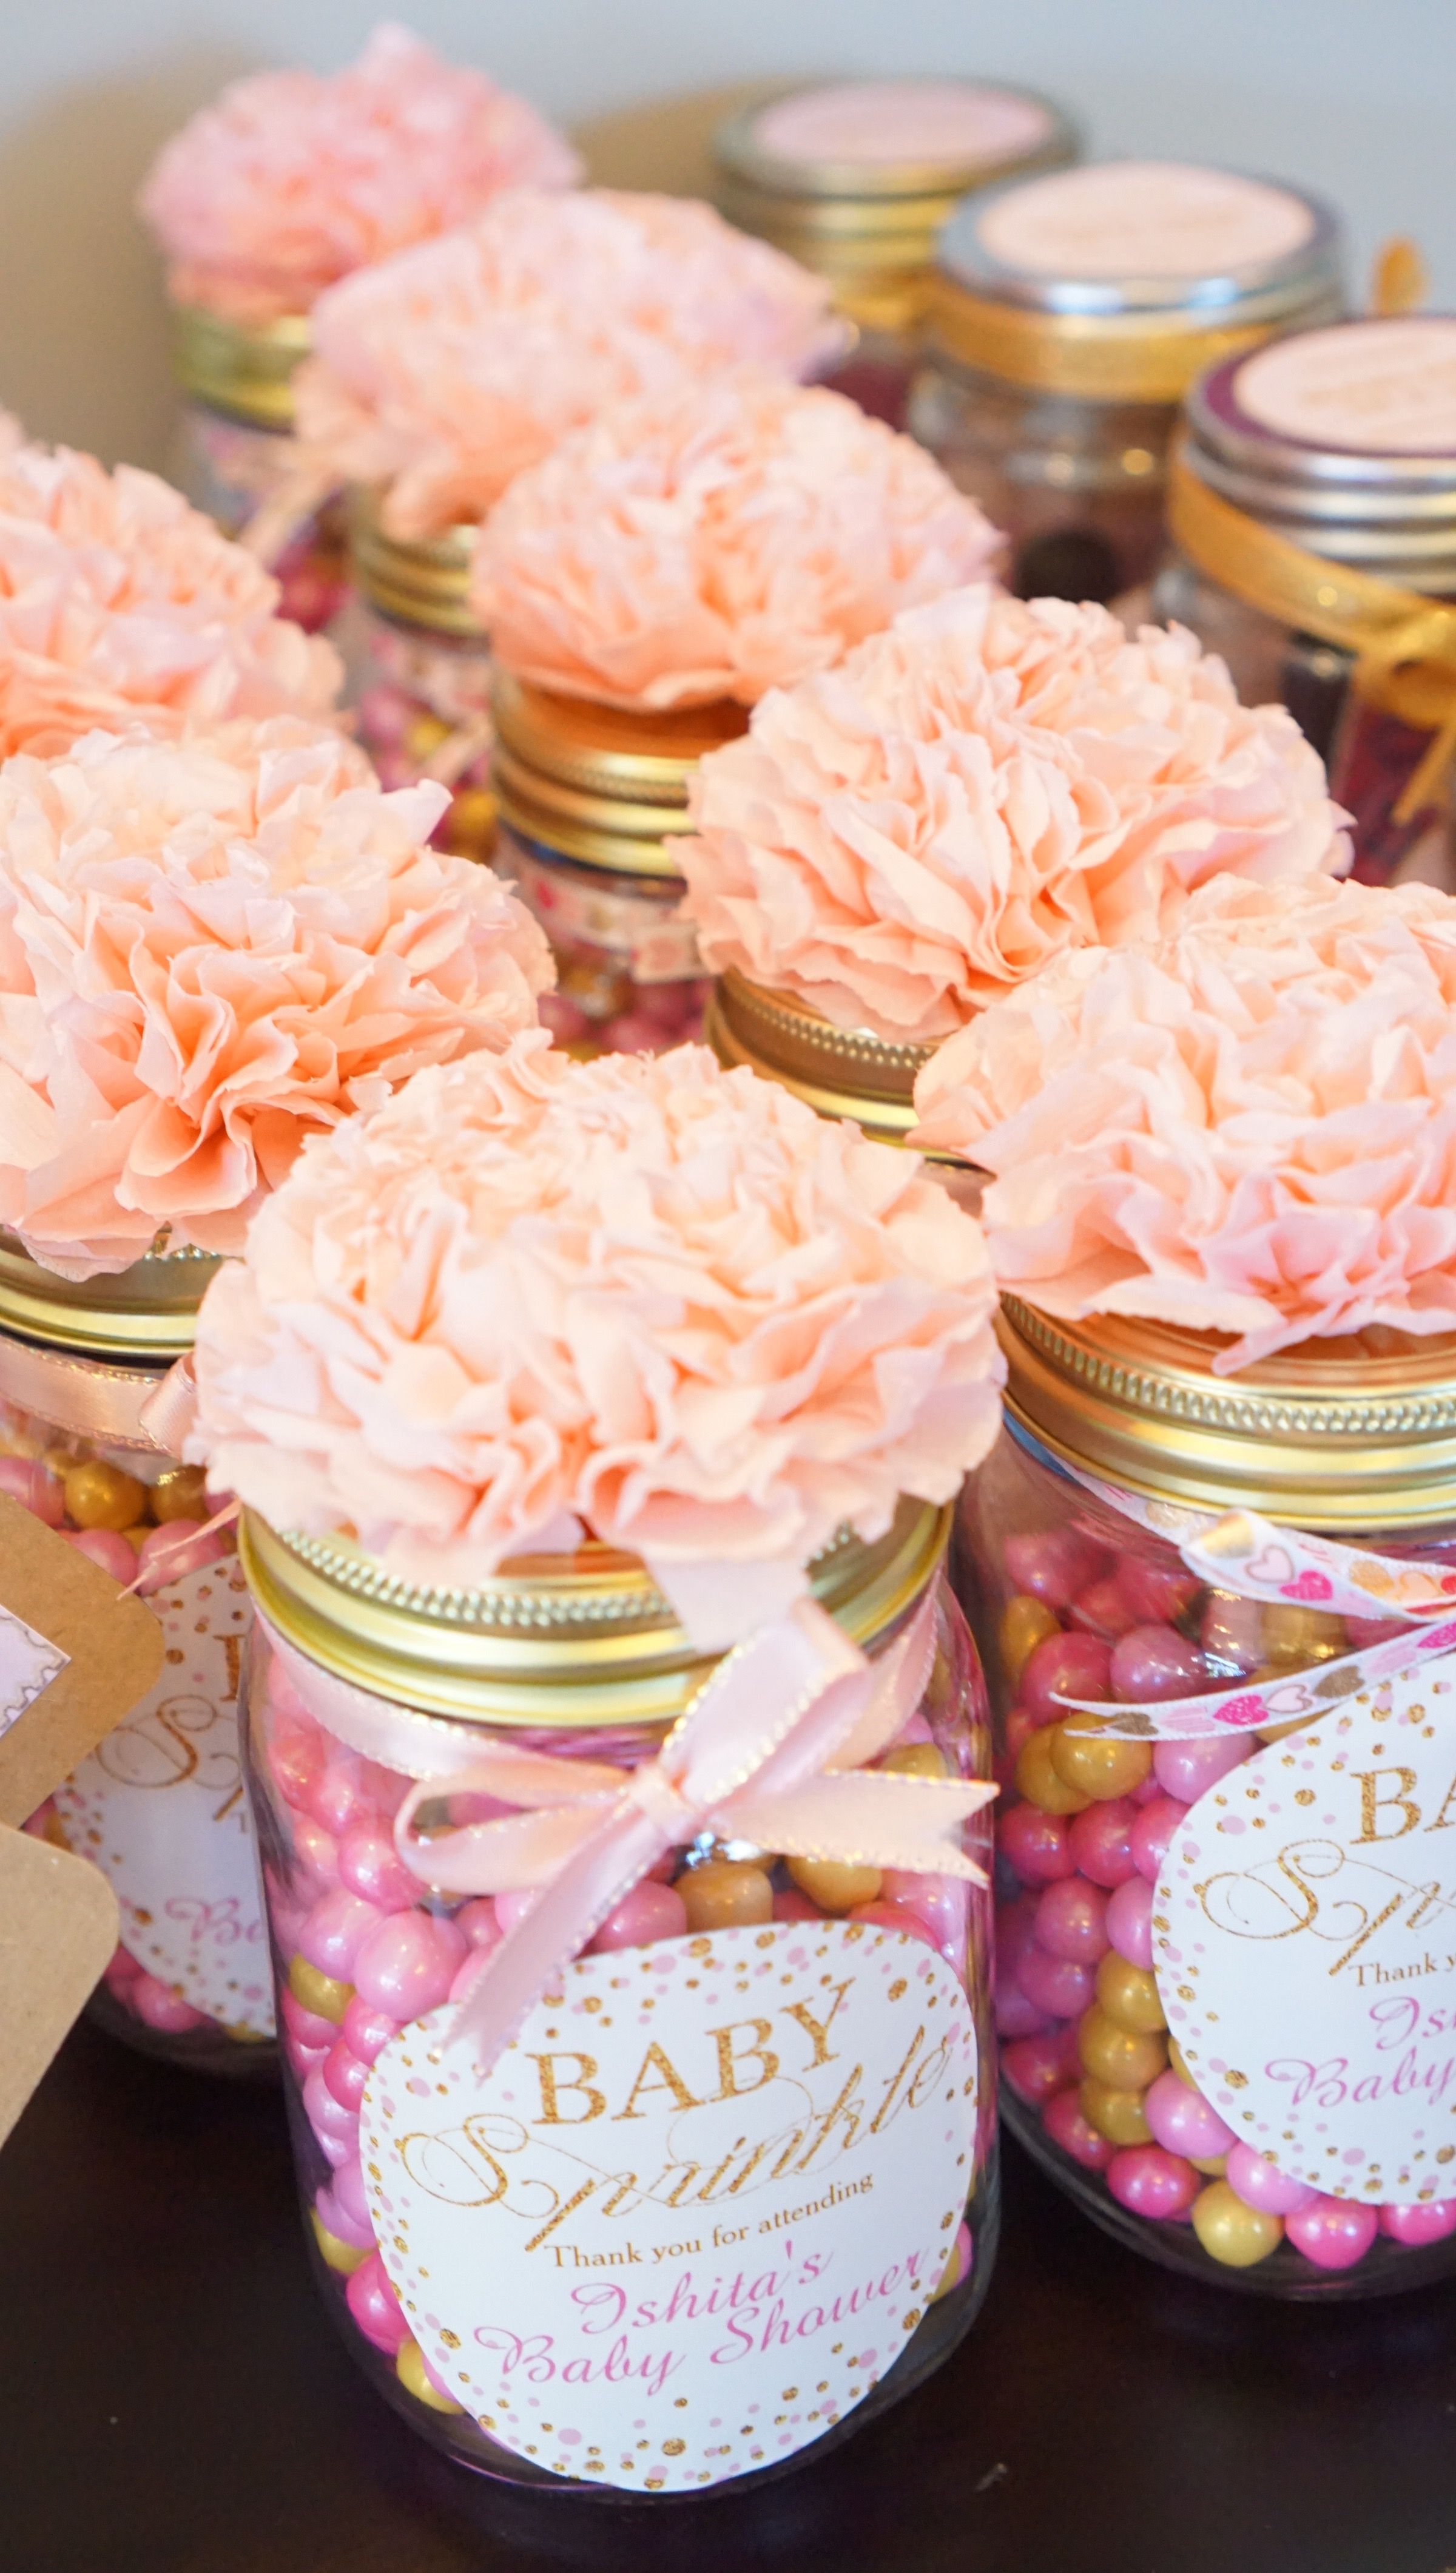 edible baby shower favors to make yourself